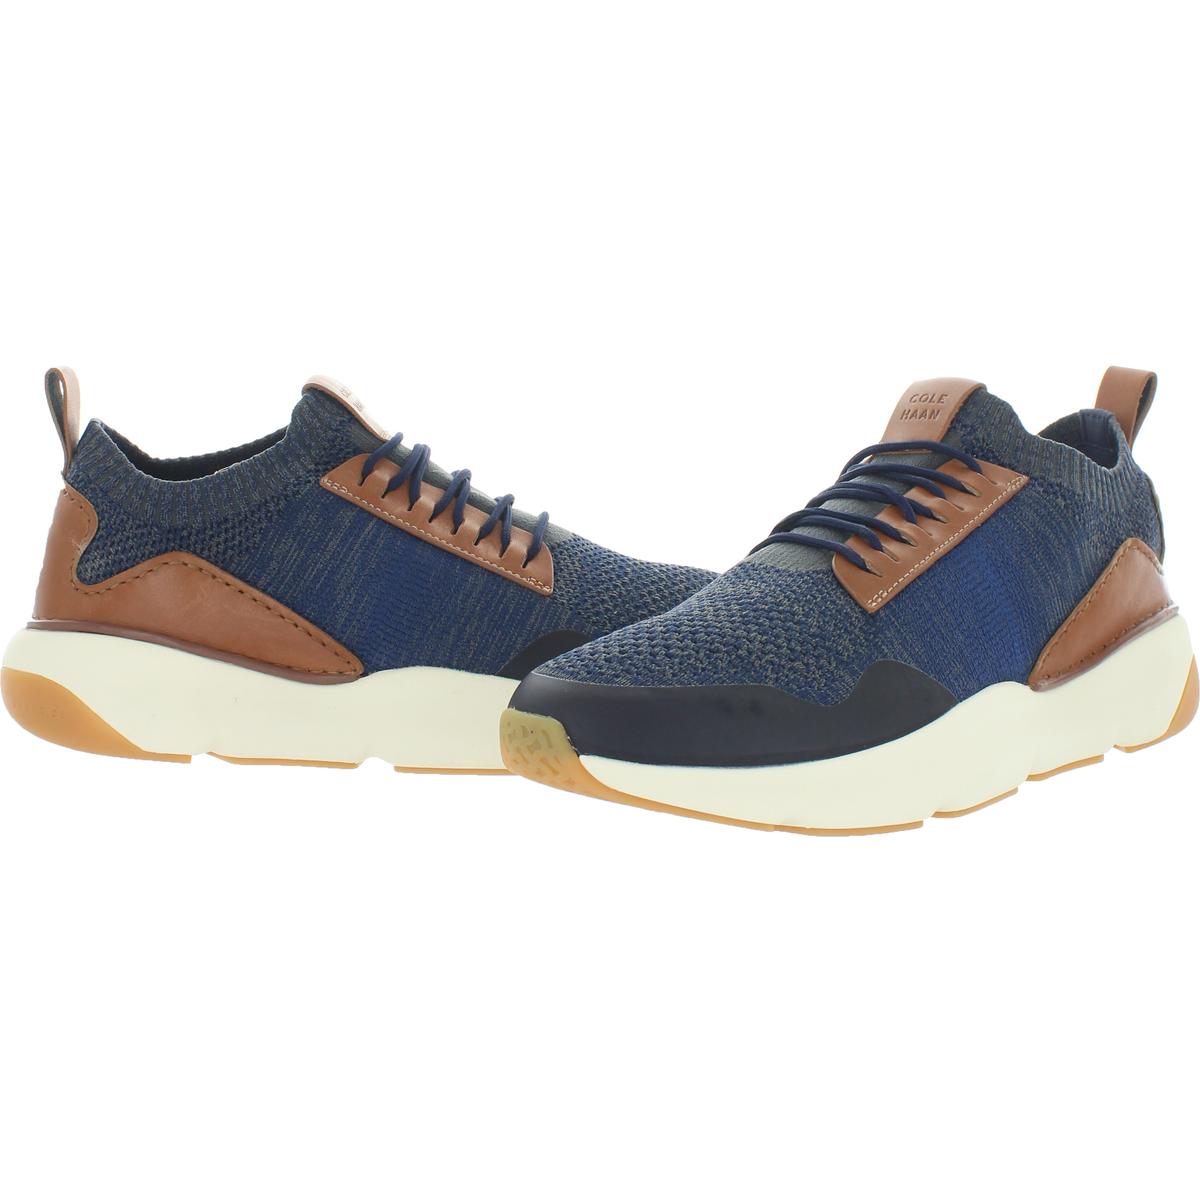 Cole Haan Mens Zerogrand All Day Trainer Knit Athletic Shoes Sneakers ...